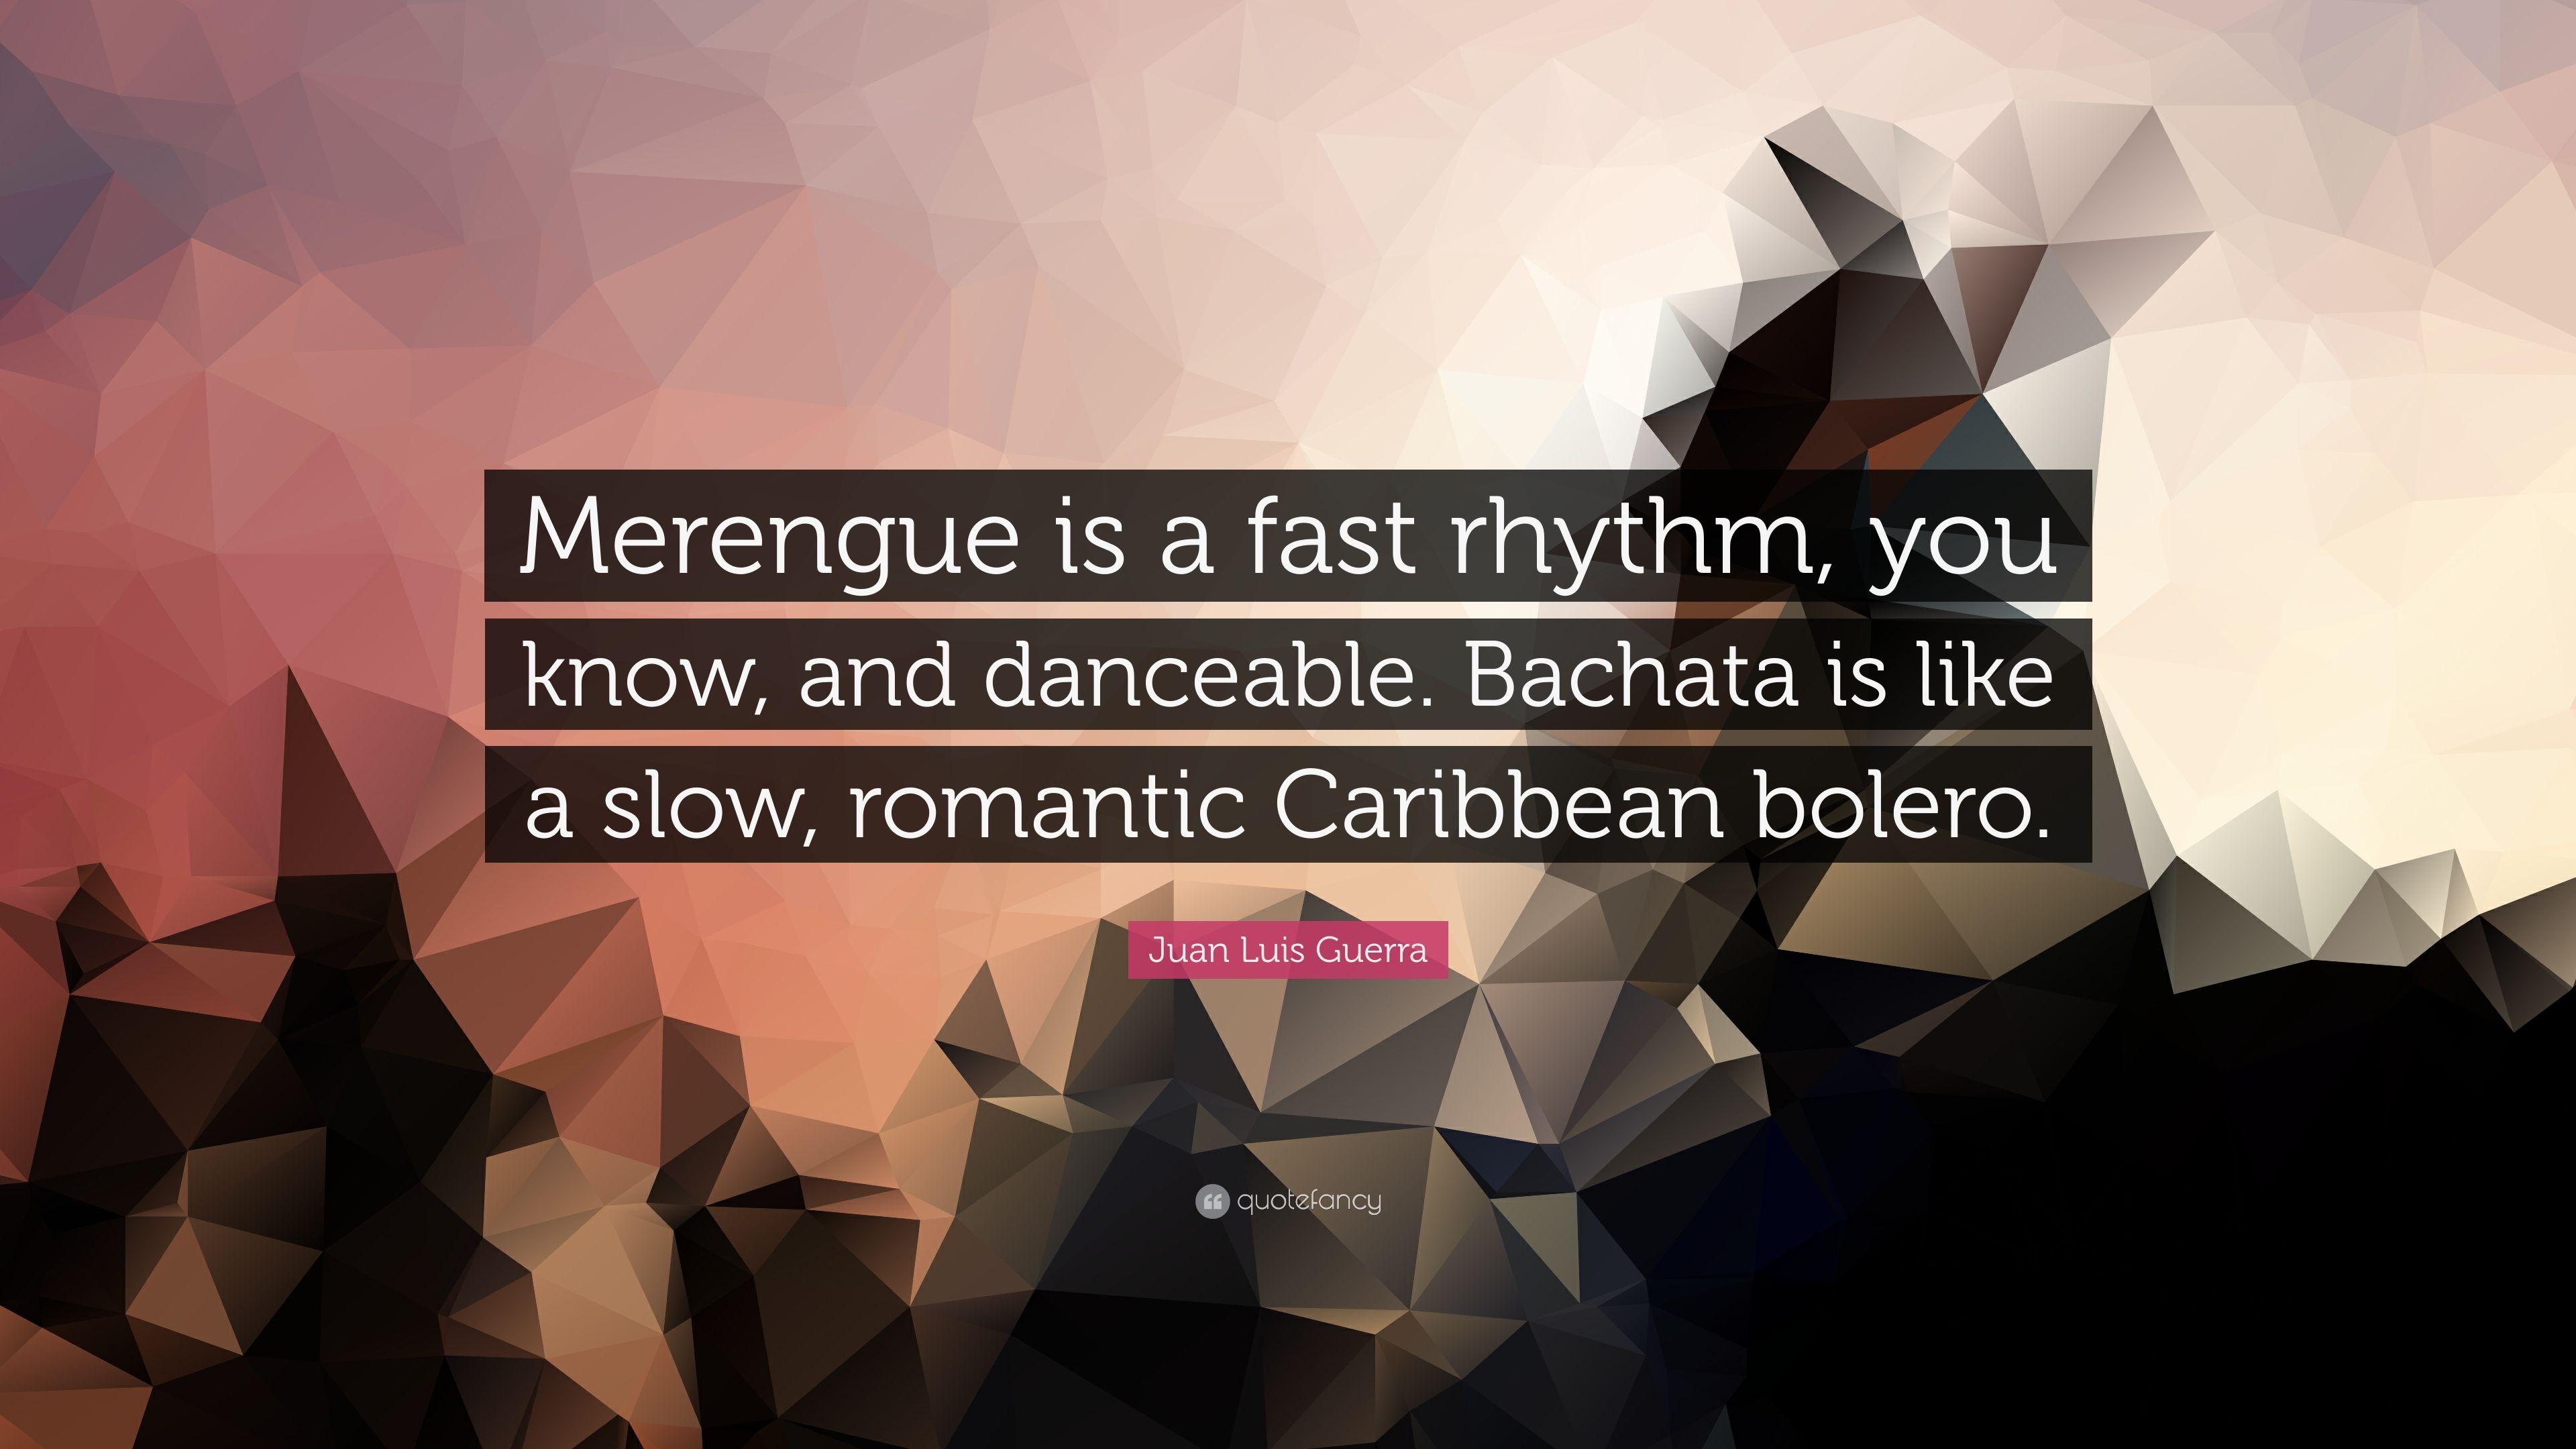 Juan Luis Guerra Quote: “Merengue is a fast rhythm, you know